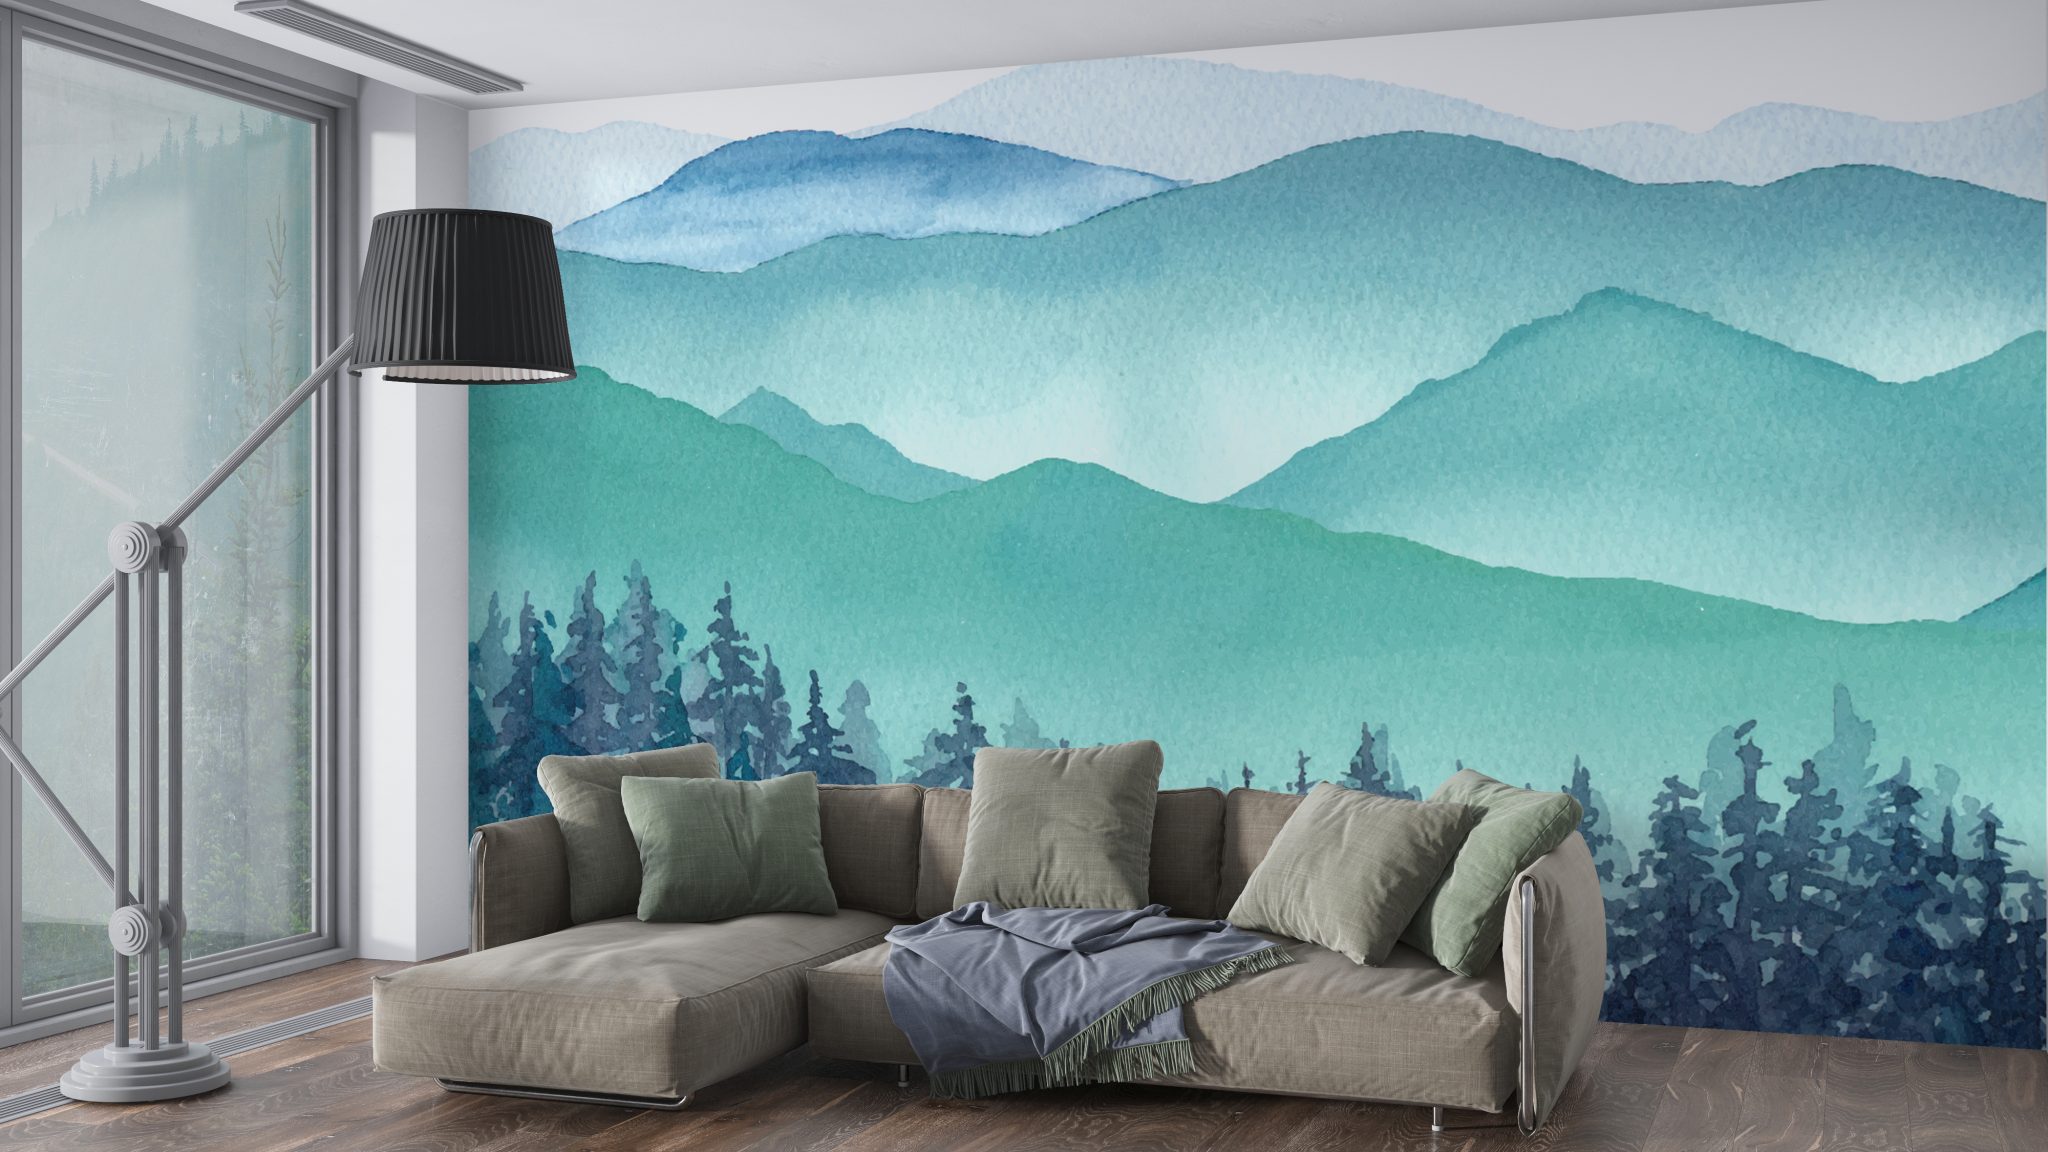 10 Beautiful Pine Tree Wallpaper Murals for Home Decoration Ideas